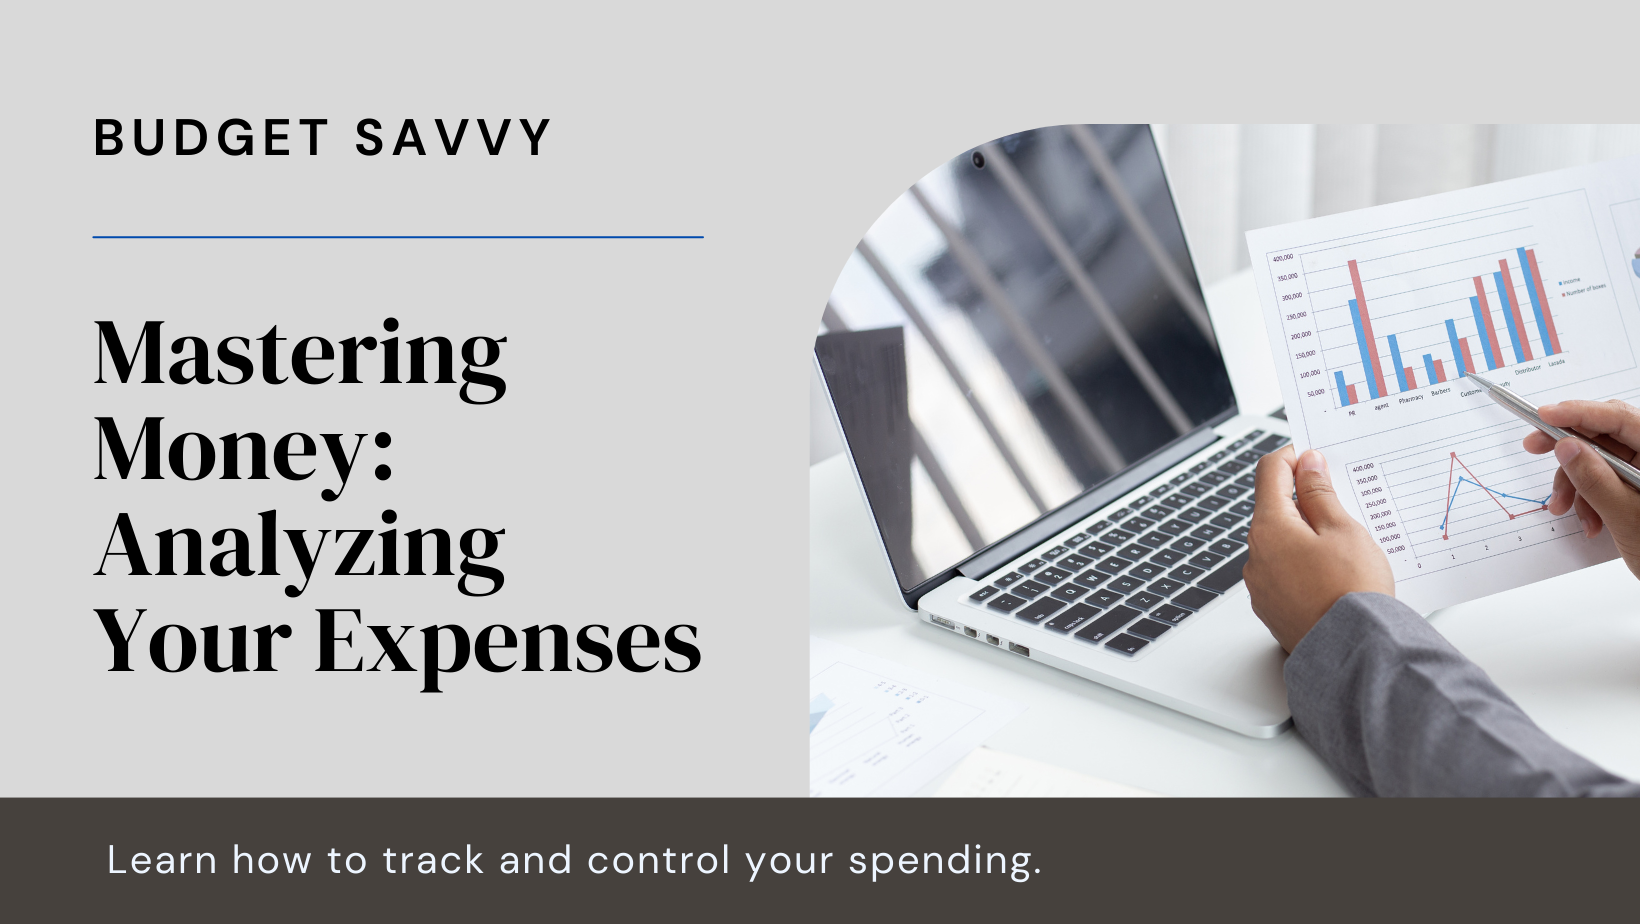 Step 3 Analyzing Your Expenses